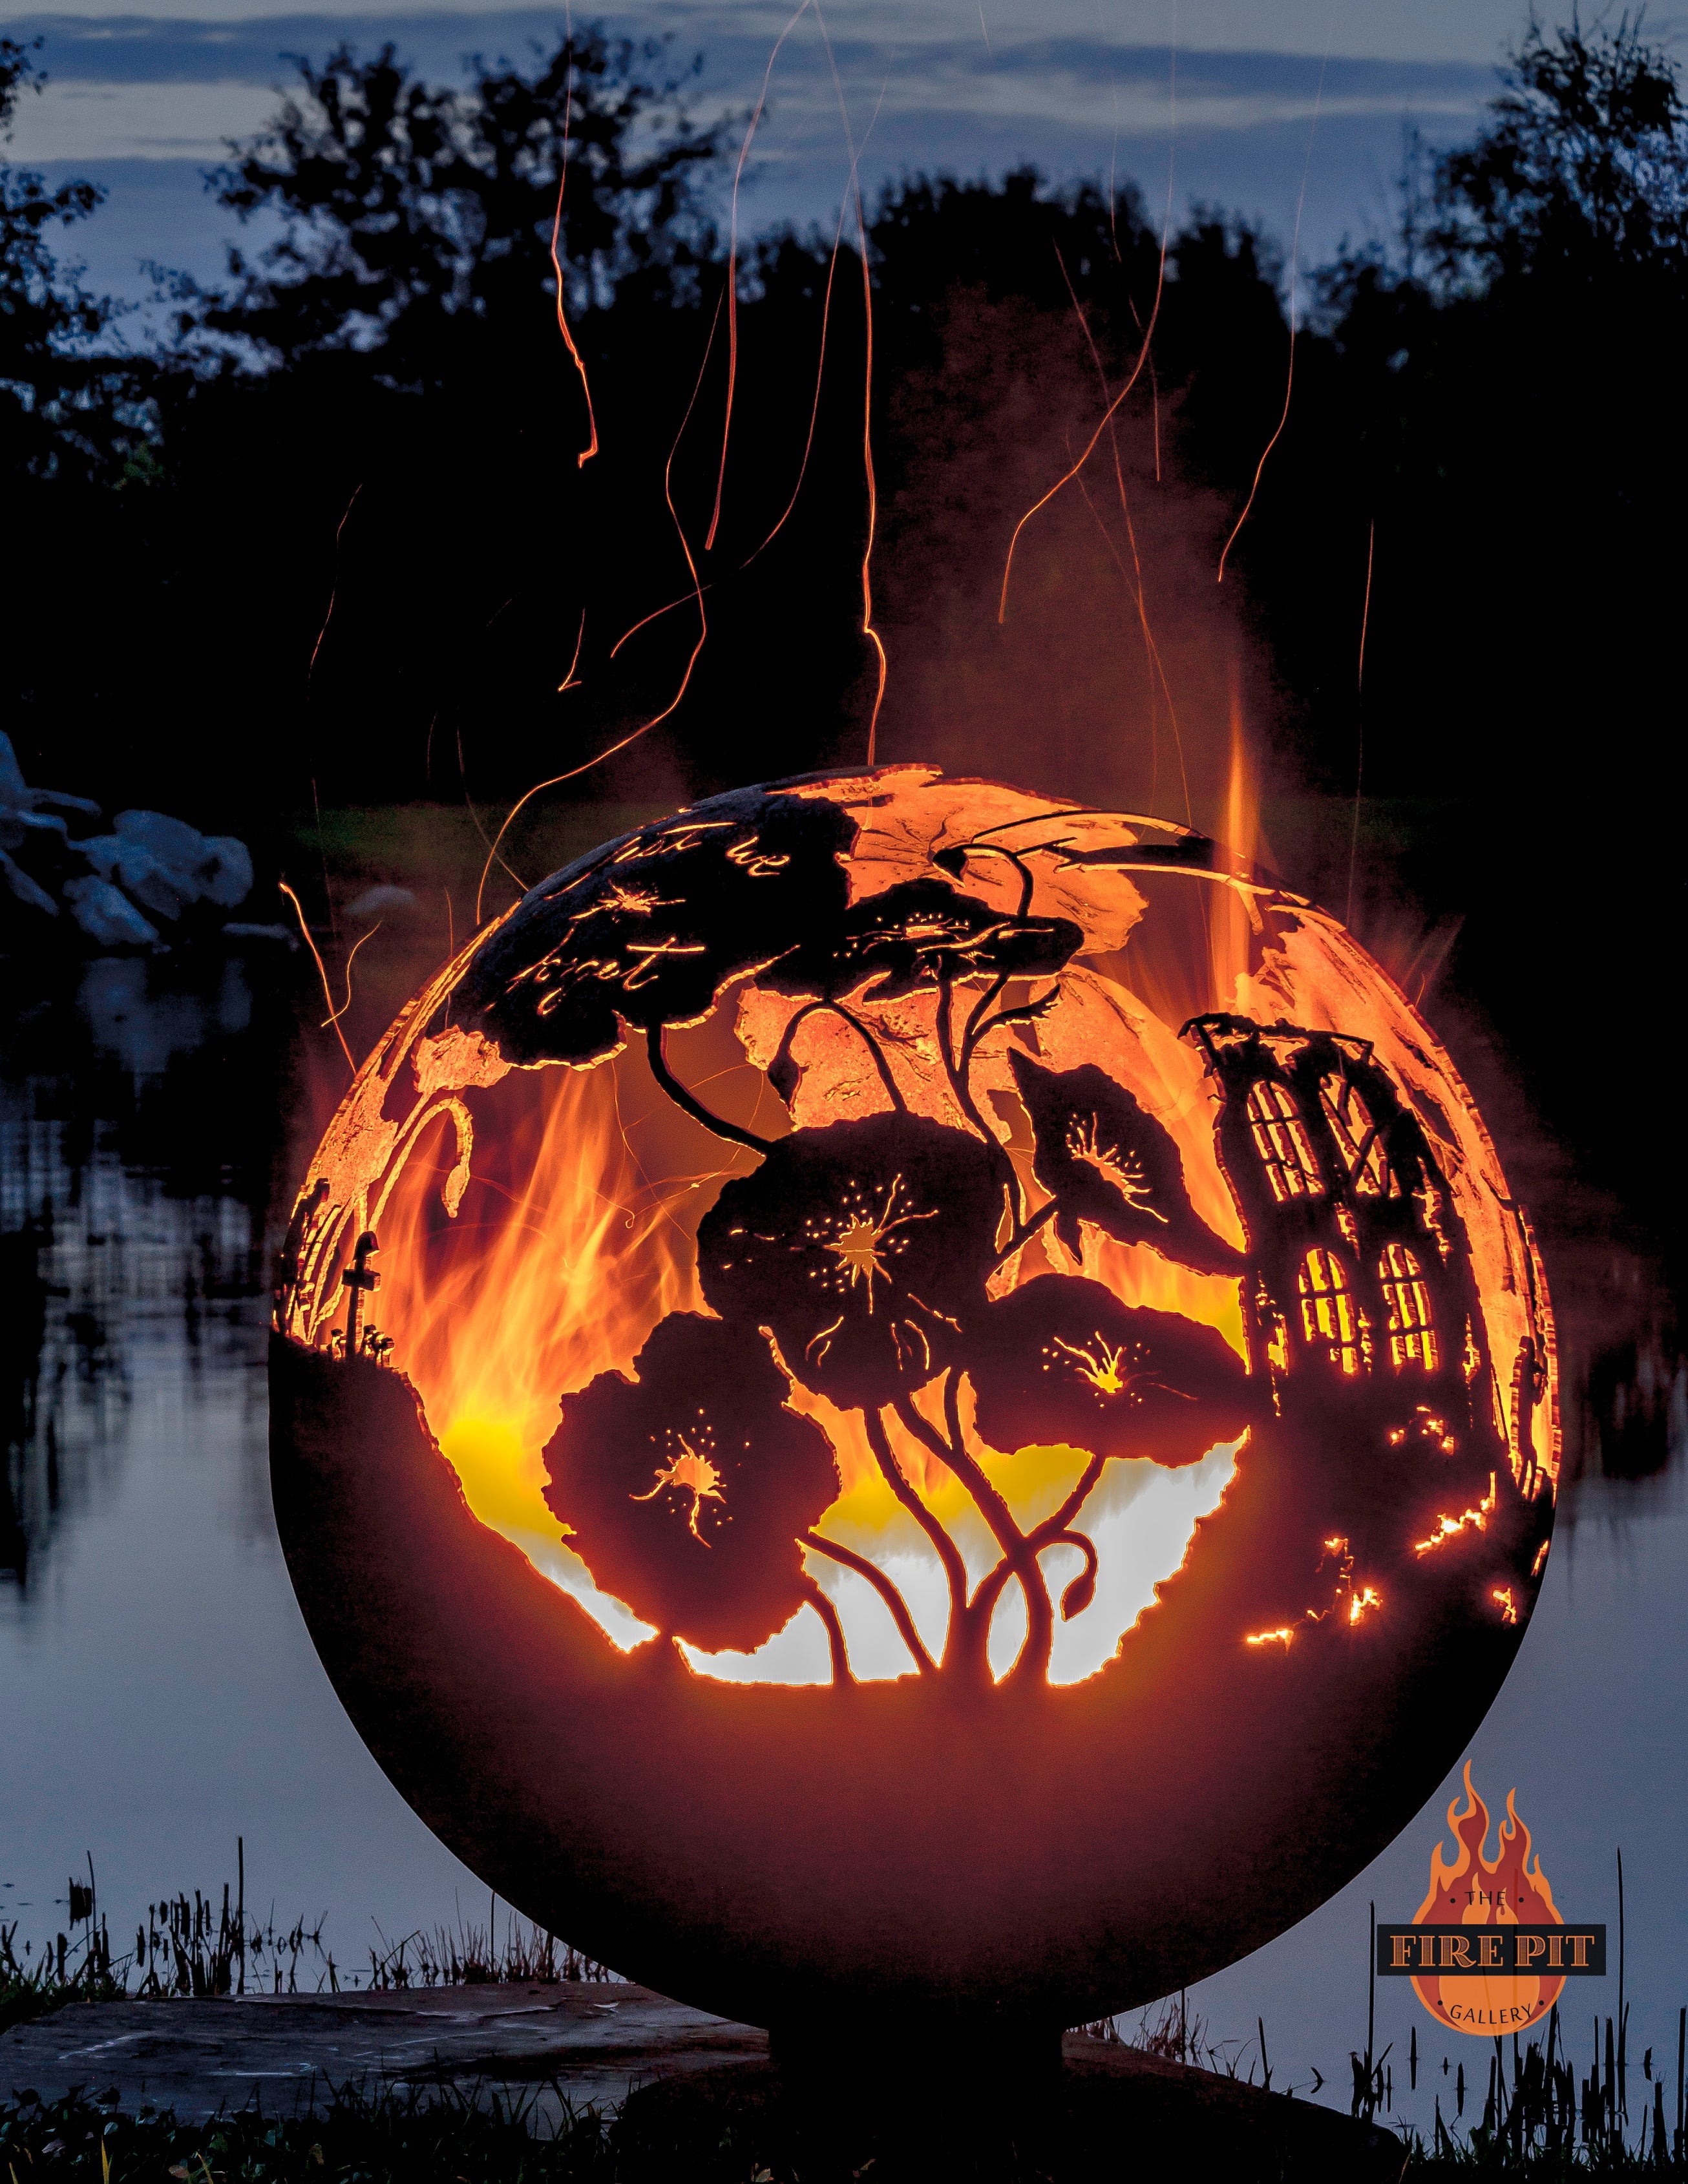 The Fire Pit Gallery Lest We Forget – Remembrance Day Fire Pit Sphere